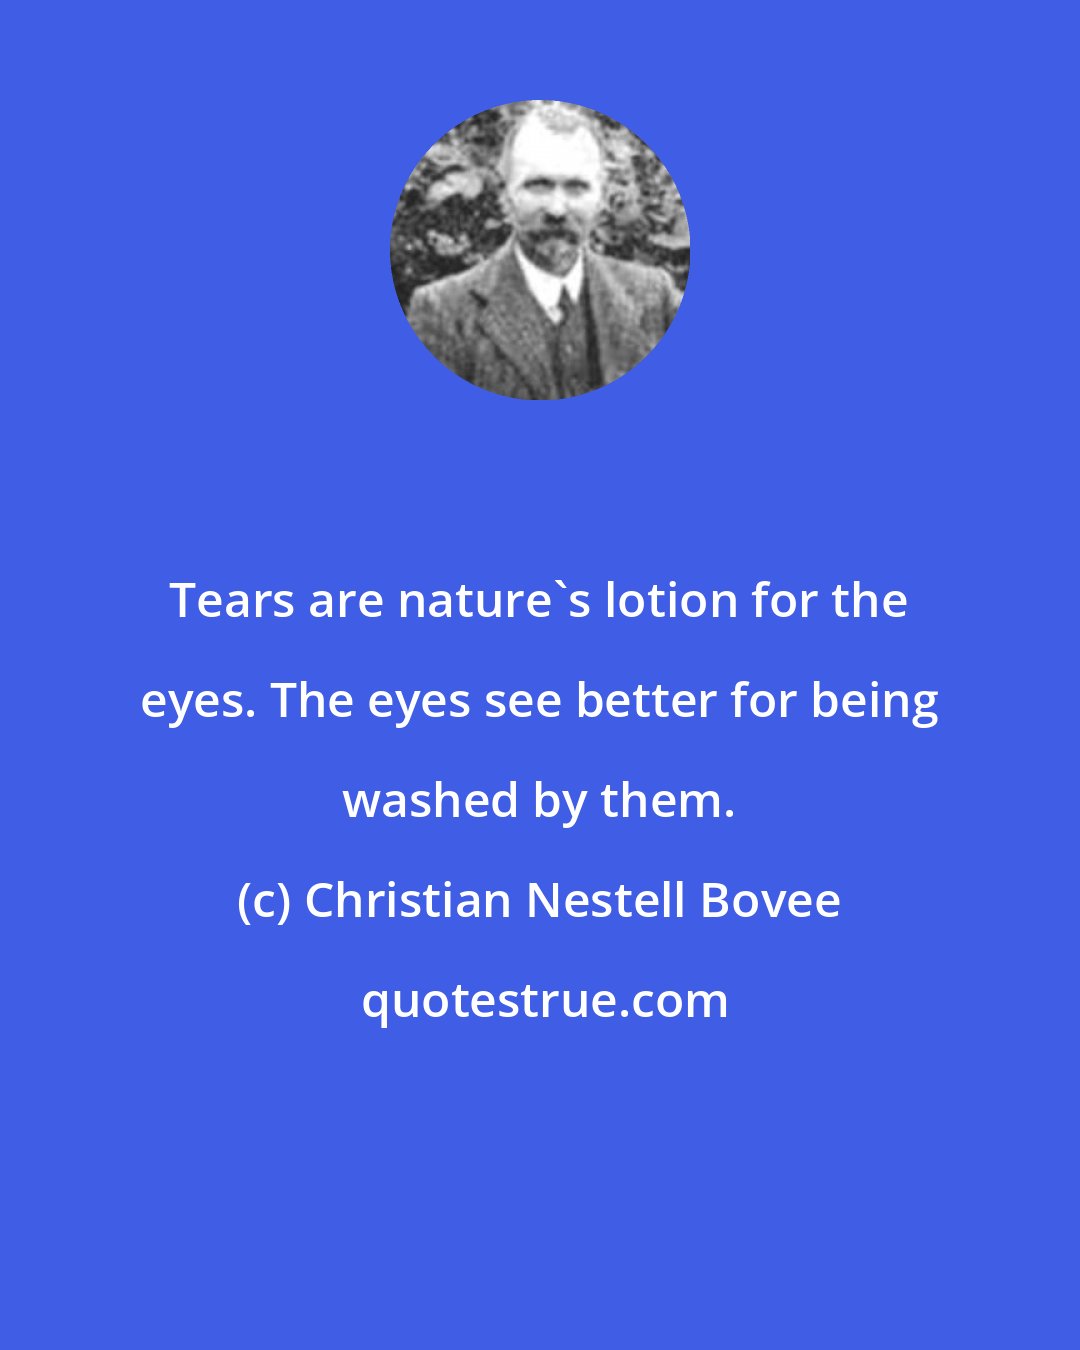 Christian Nestell Bovee: Tears are nature's lotion for the eyes. The eyes see better for being washed by them.